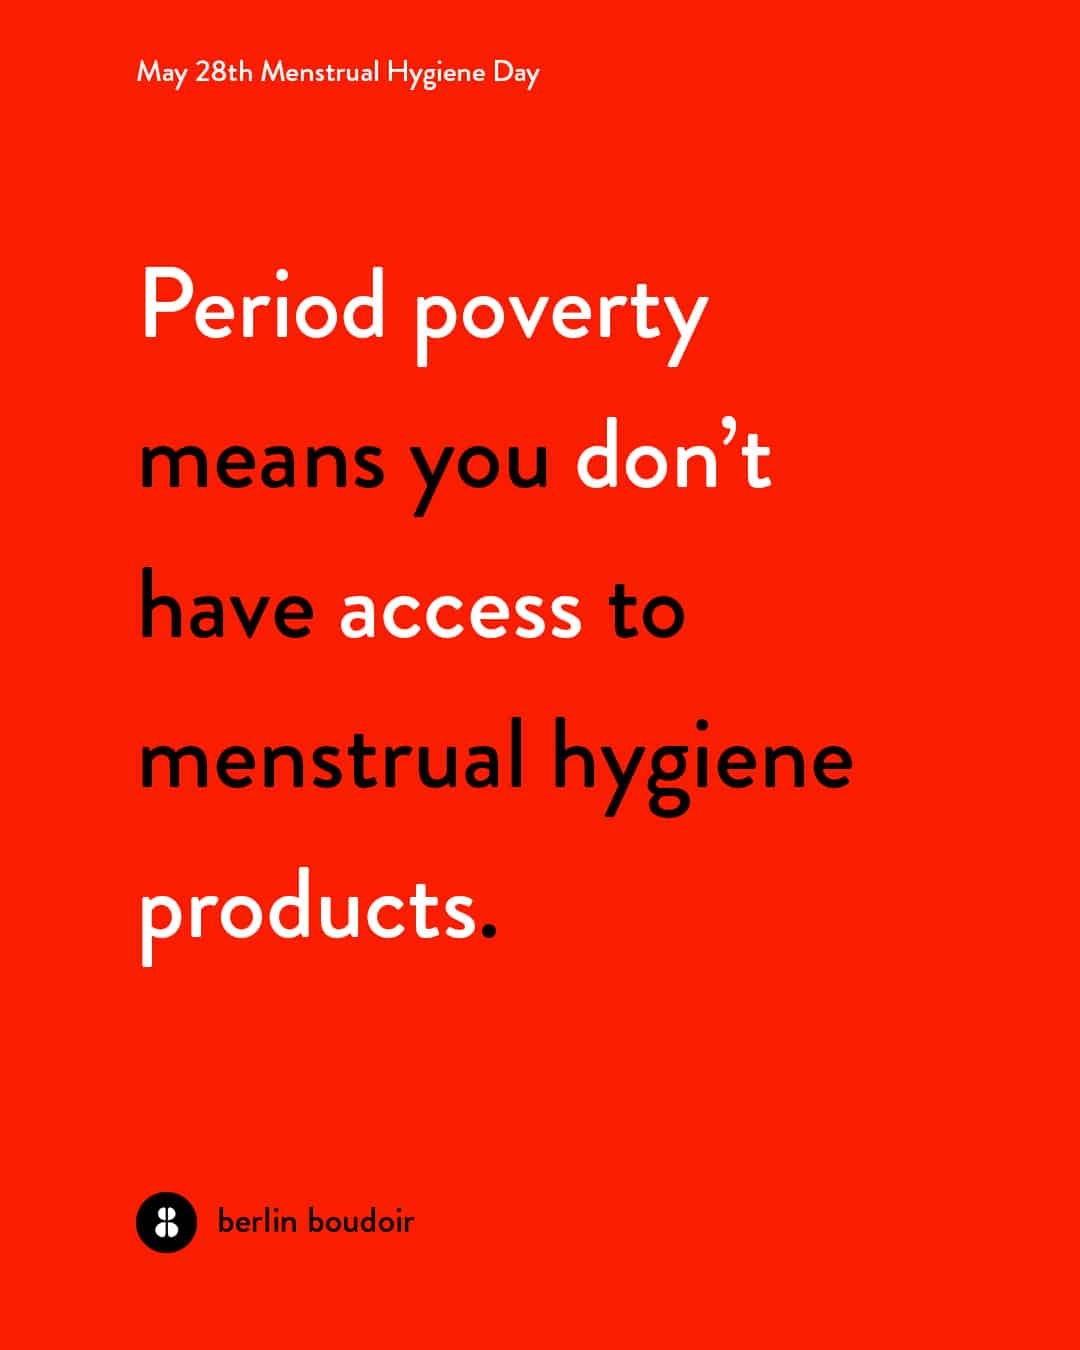 Period poverty means you don't have access to menstrual hygiene products